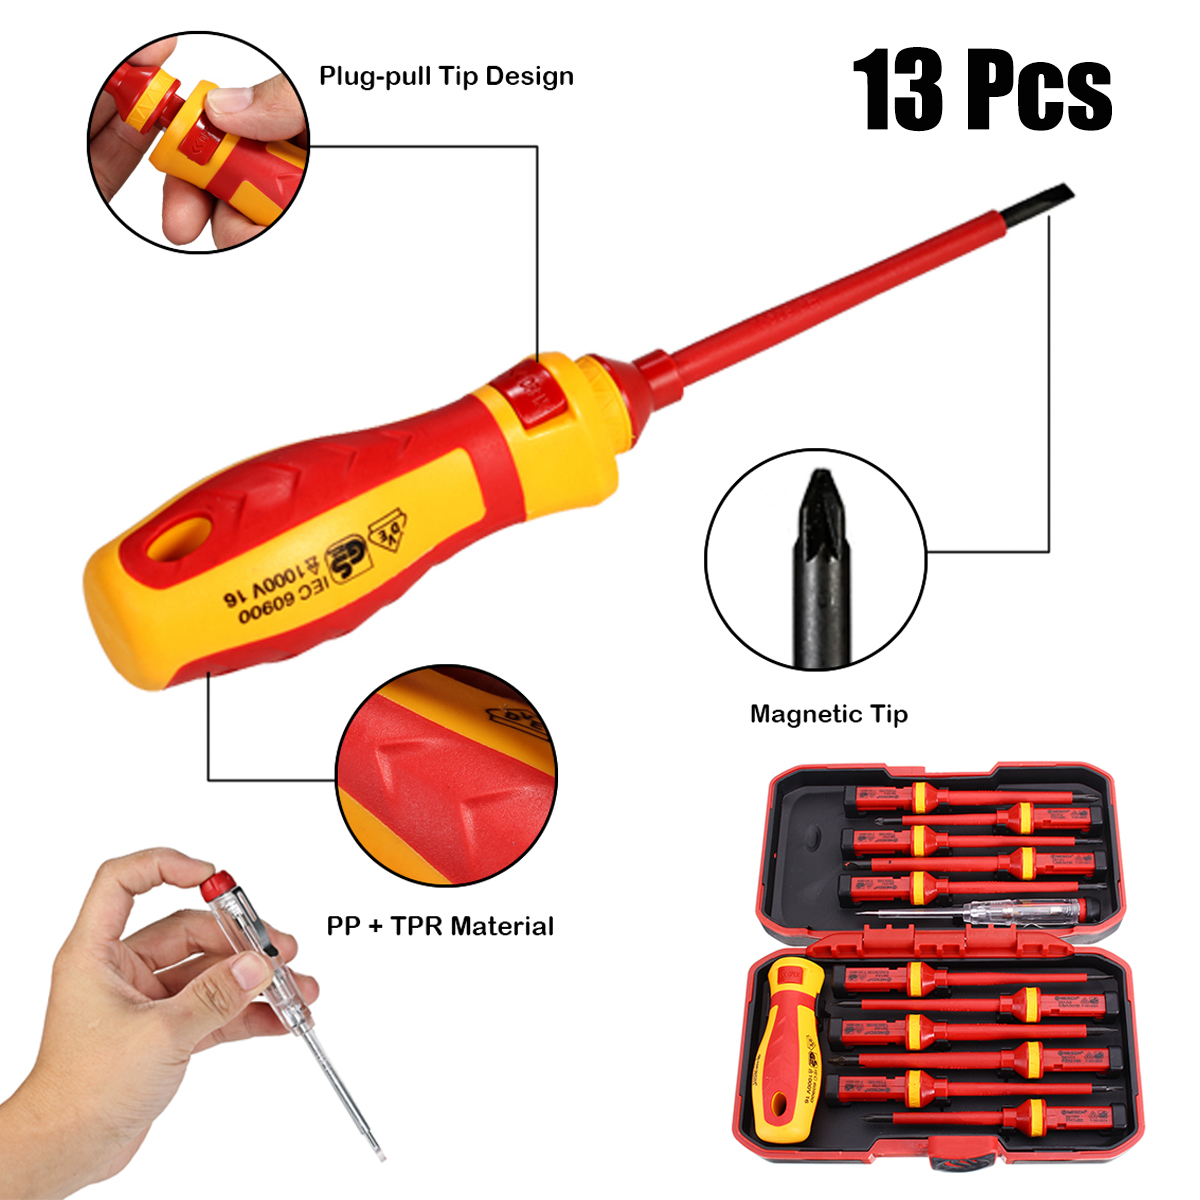 13Pcs 1000V Electronic Insulated Screwdriver Set Phillips Slotted Torx CR-V Screwdriver Repair Tools 14